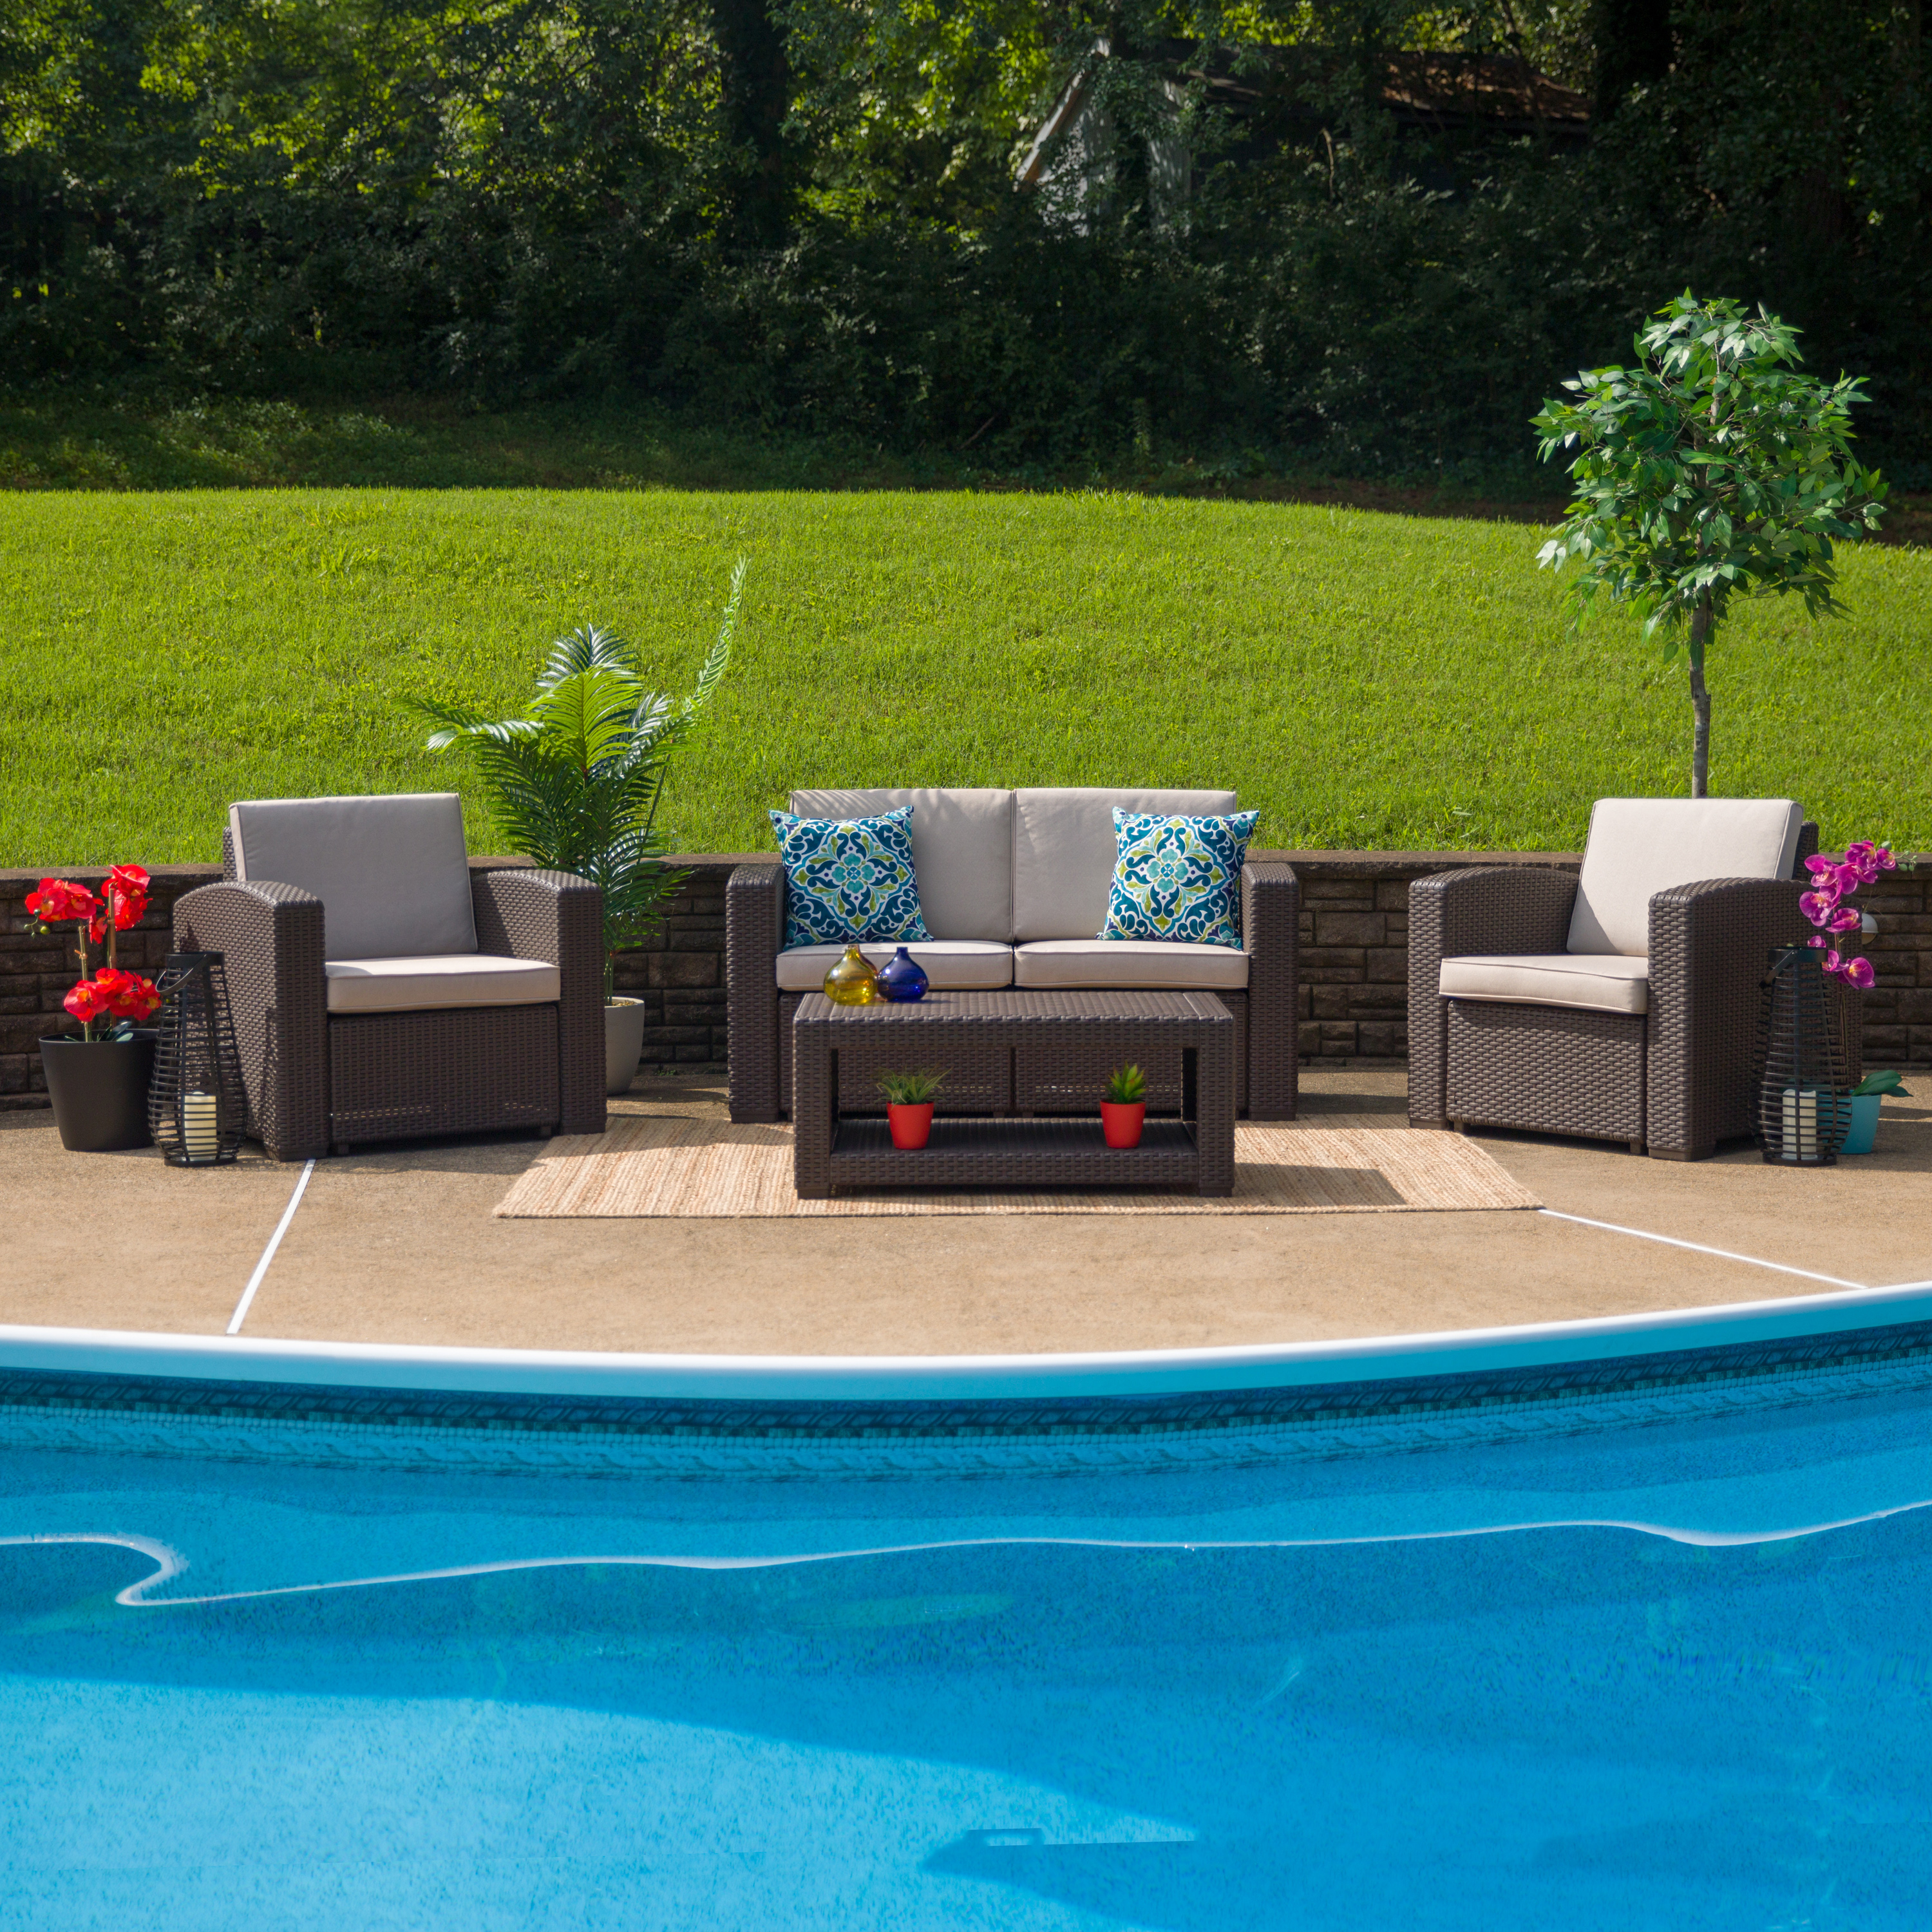 Flash Furniture Seneca 4 Piece Outdoor Faux Rattan Chair, Loveseat and Table Set in Seneca Chocolate Brown - image 2 of 5